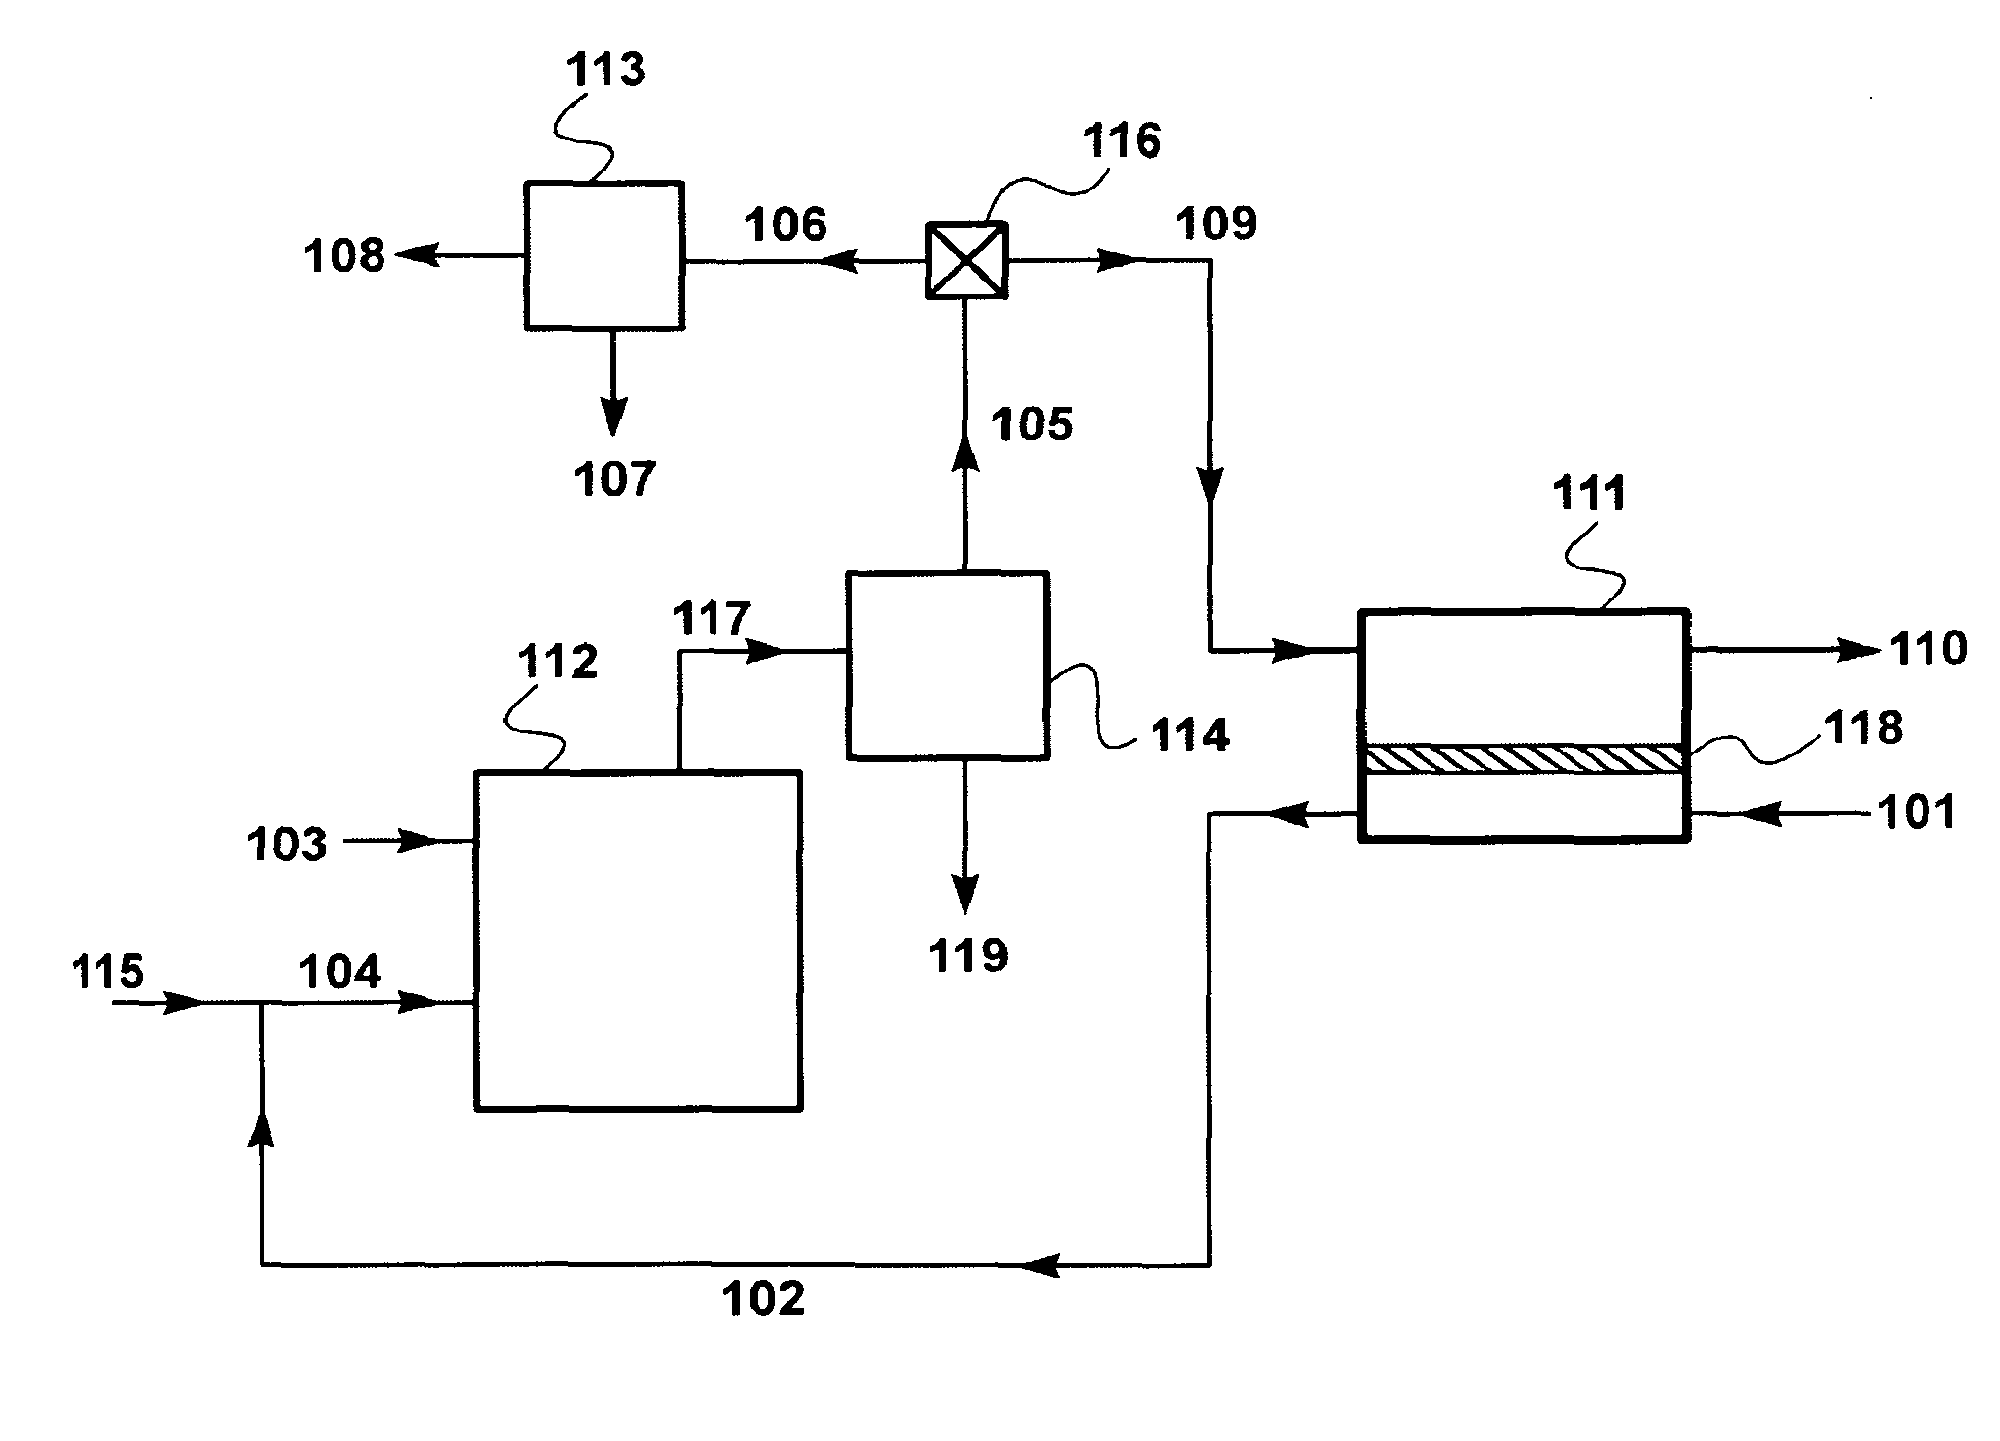 Process for separating carbon dioxide from flue gas using sweep-based membrane separation and absorption steps